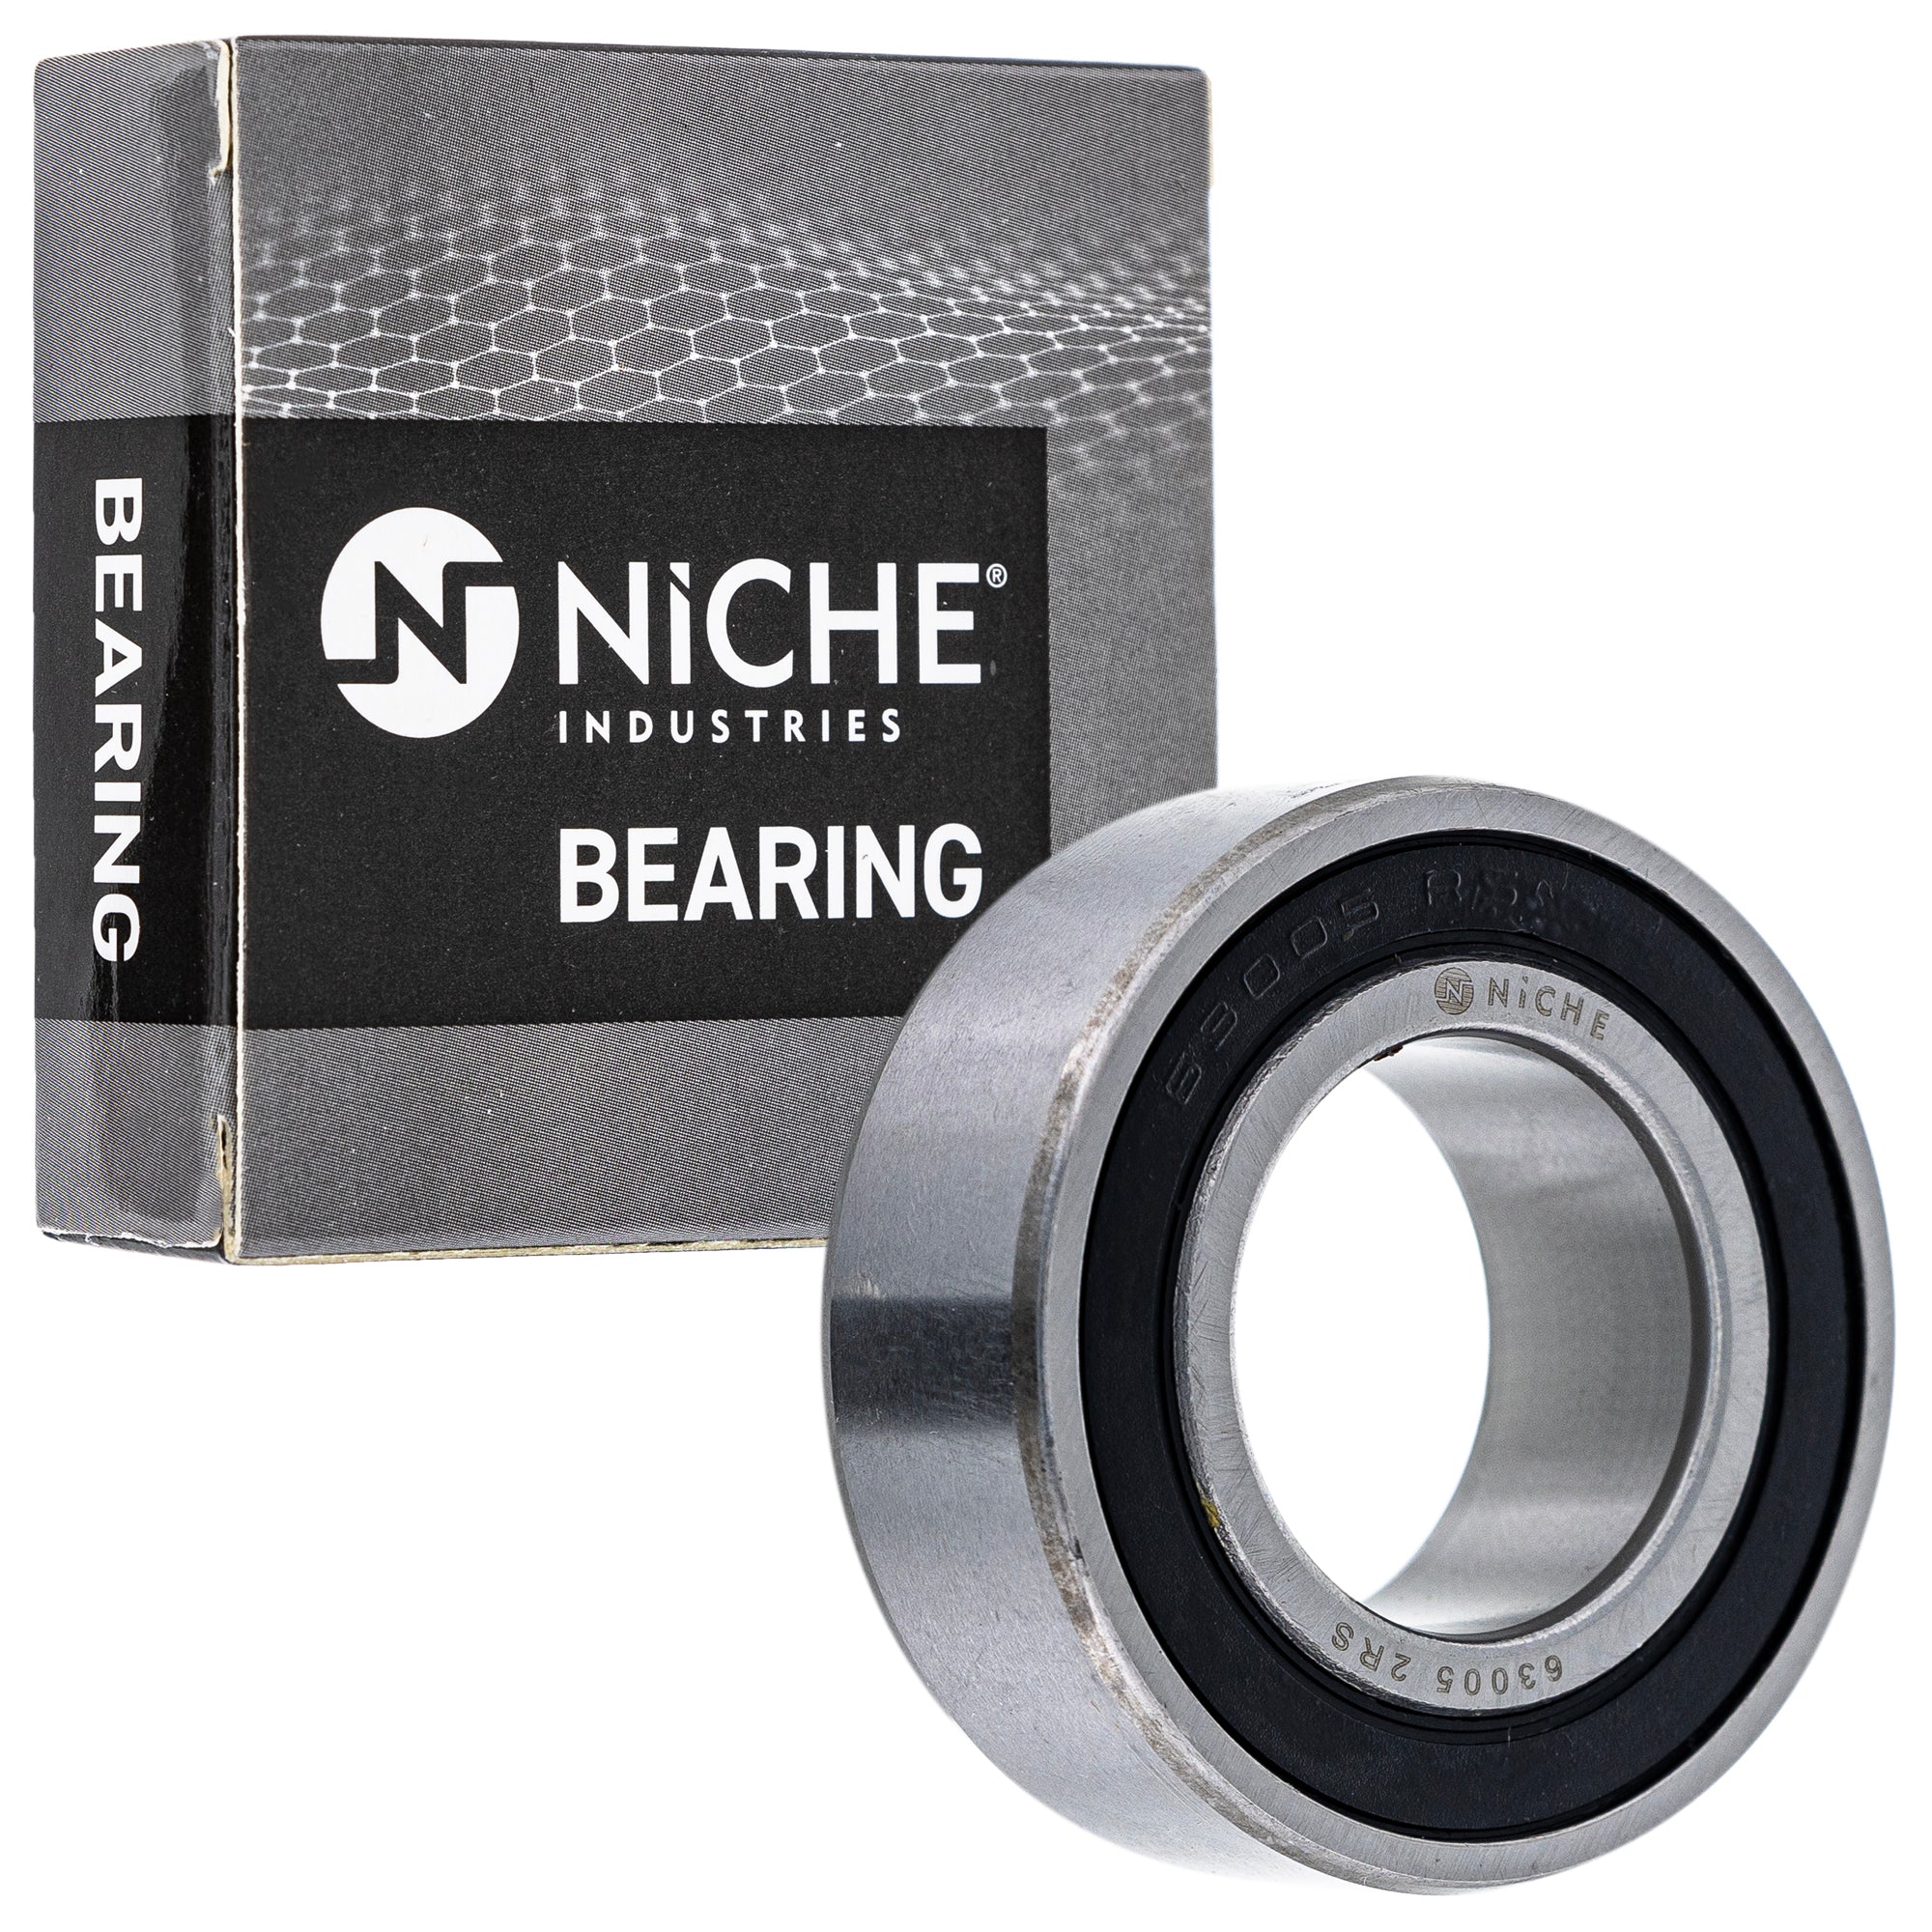 NICHE 519-CBB2335R Bearing 2-Pack for zOTHER K1100LT